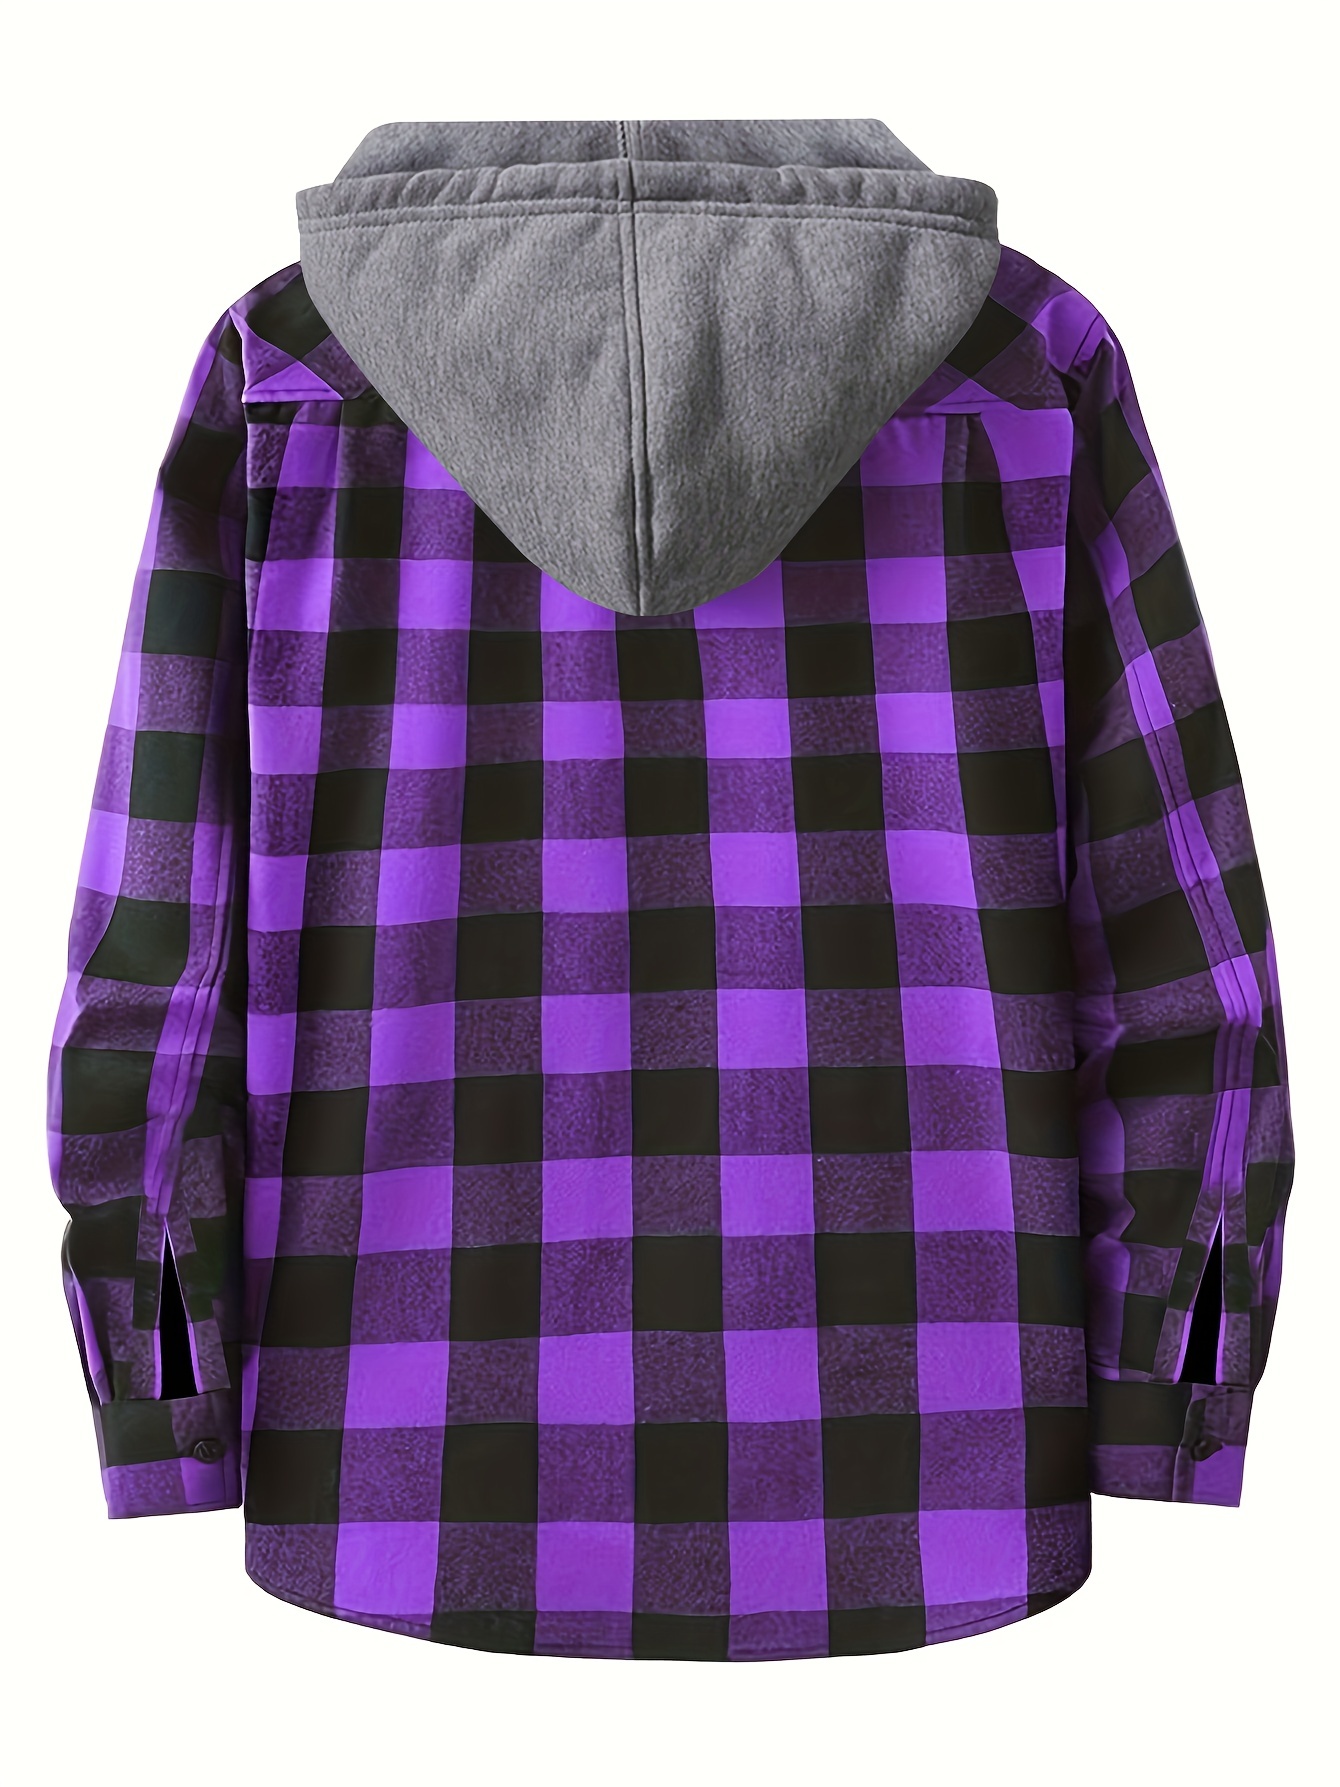 Long Sleeve Casual Regular Fit Button Up Hooded Shirts Jacket, Plaid Shirt Coat For Men